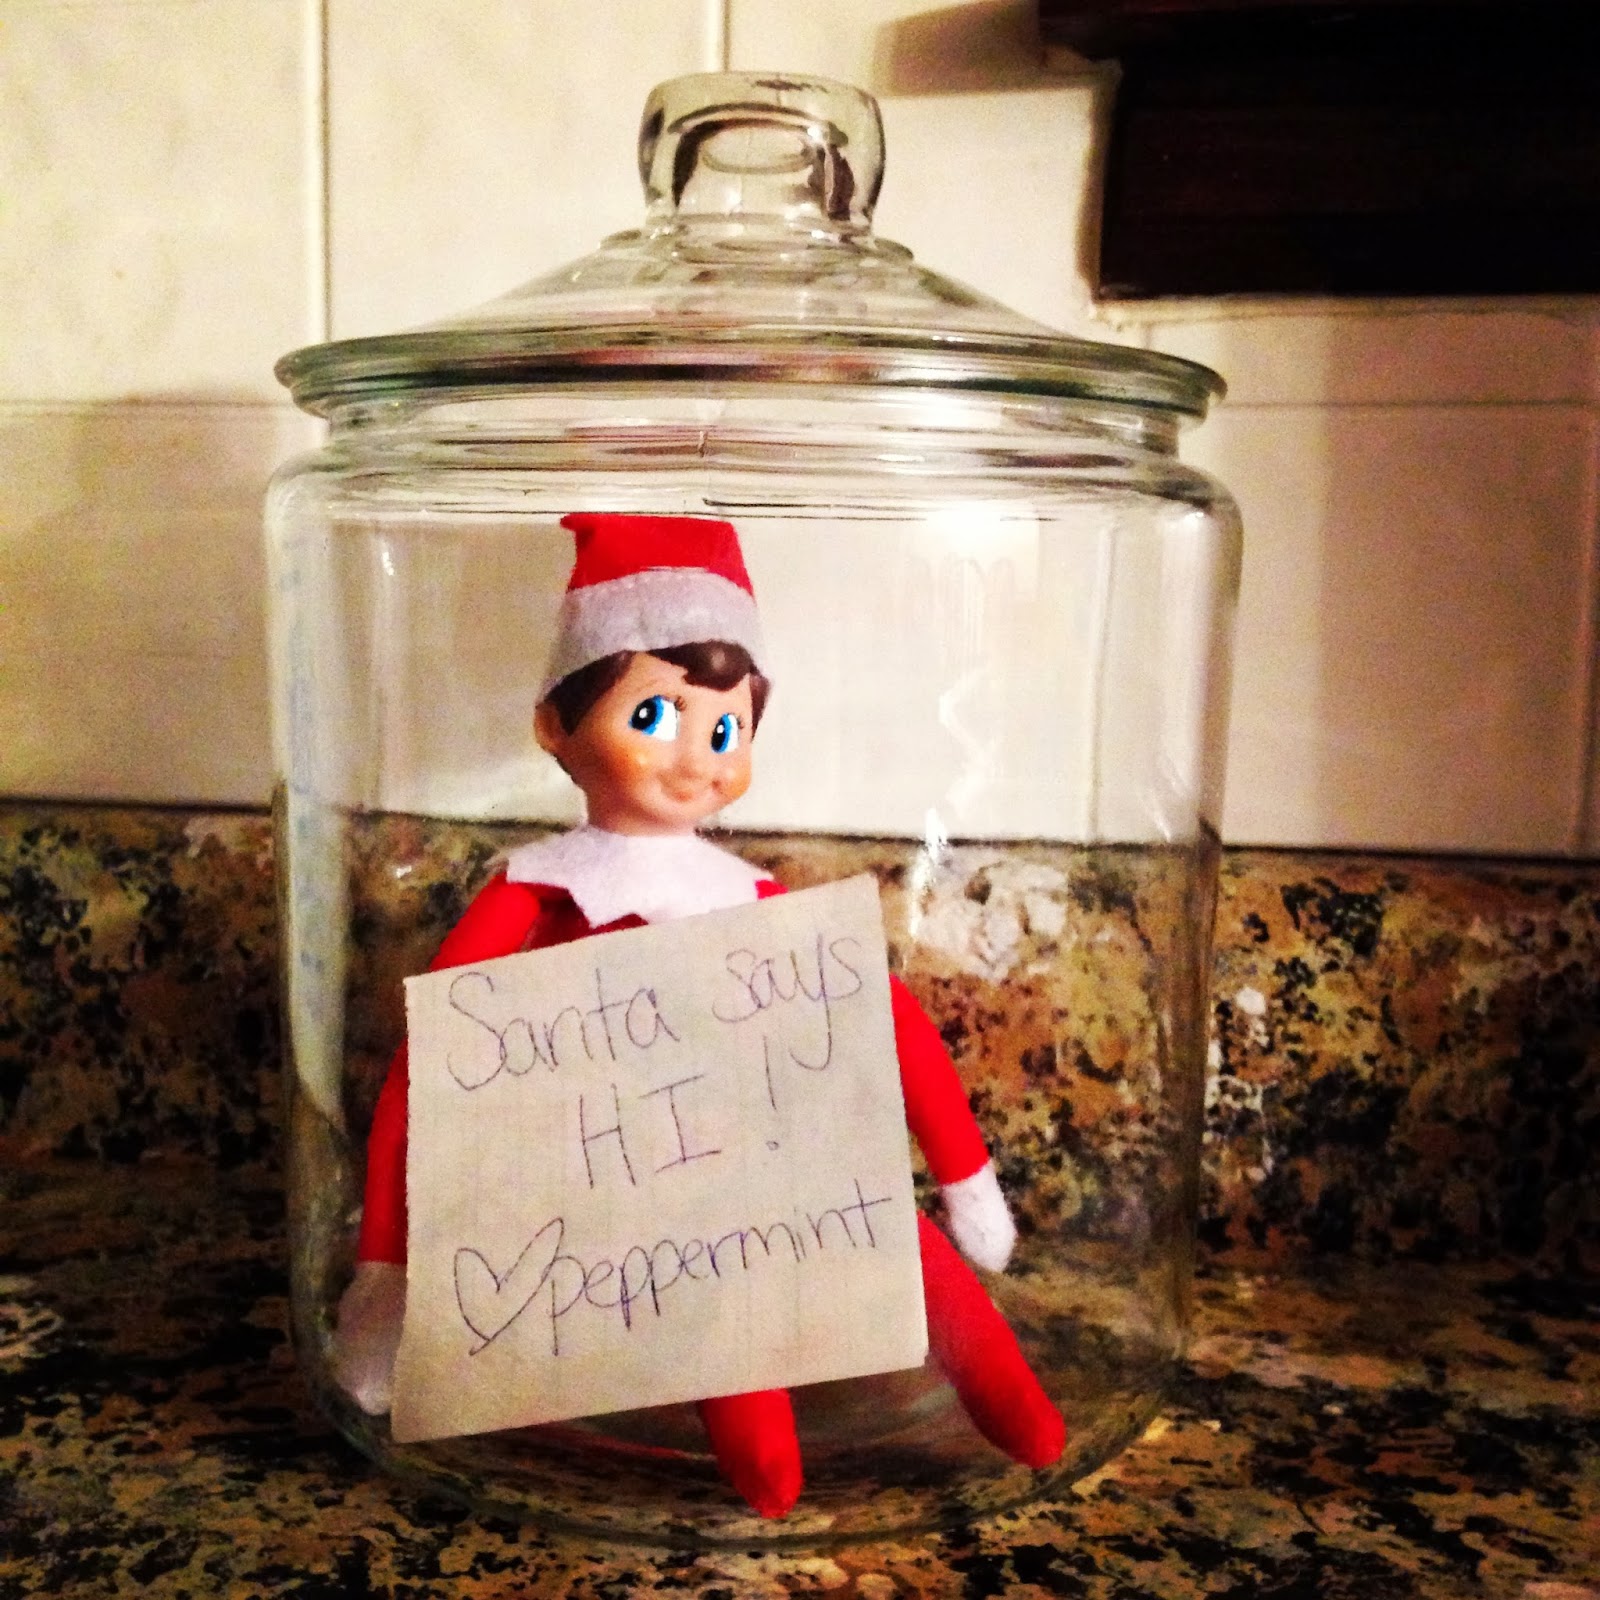 Our Elf on the Shelf: Week 2 - Building Our Story